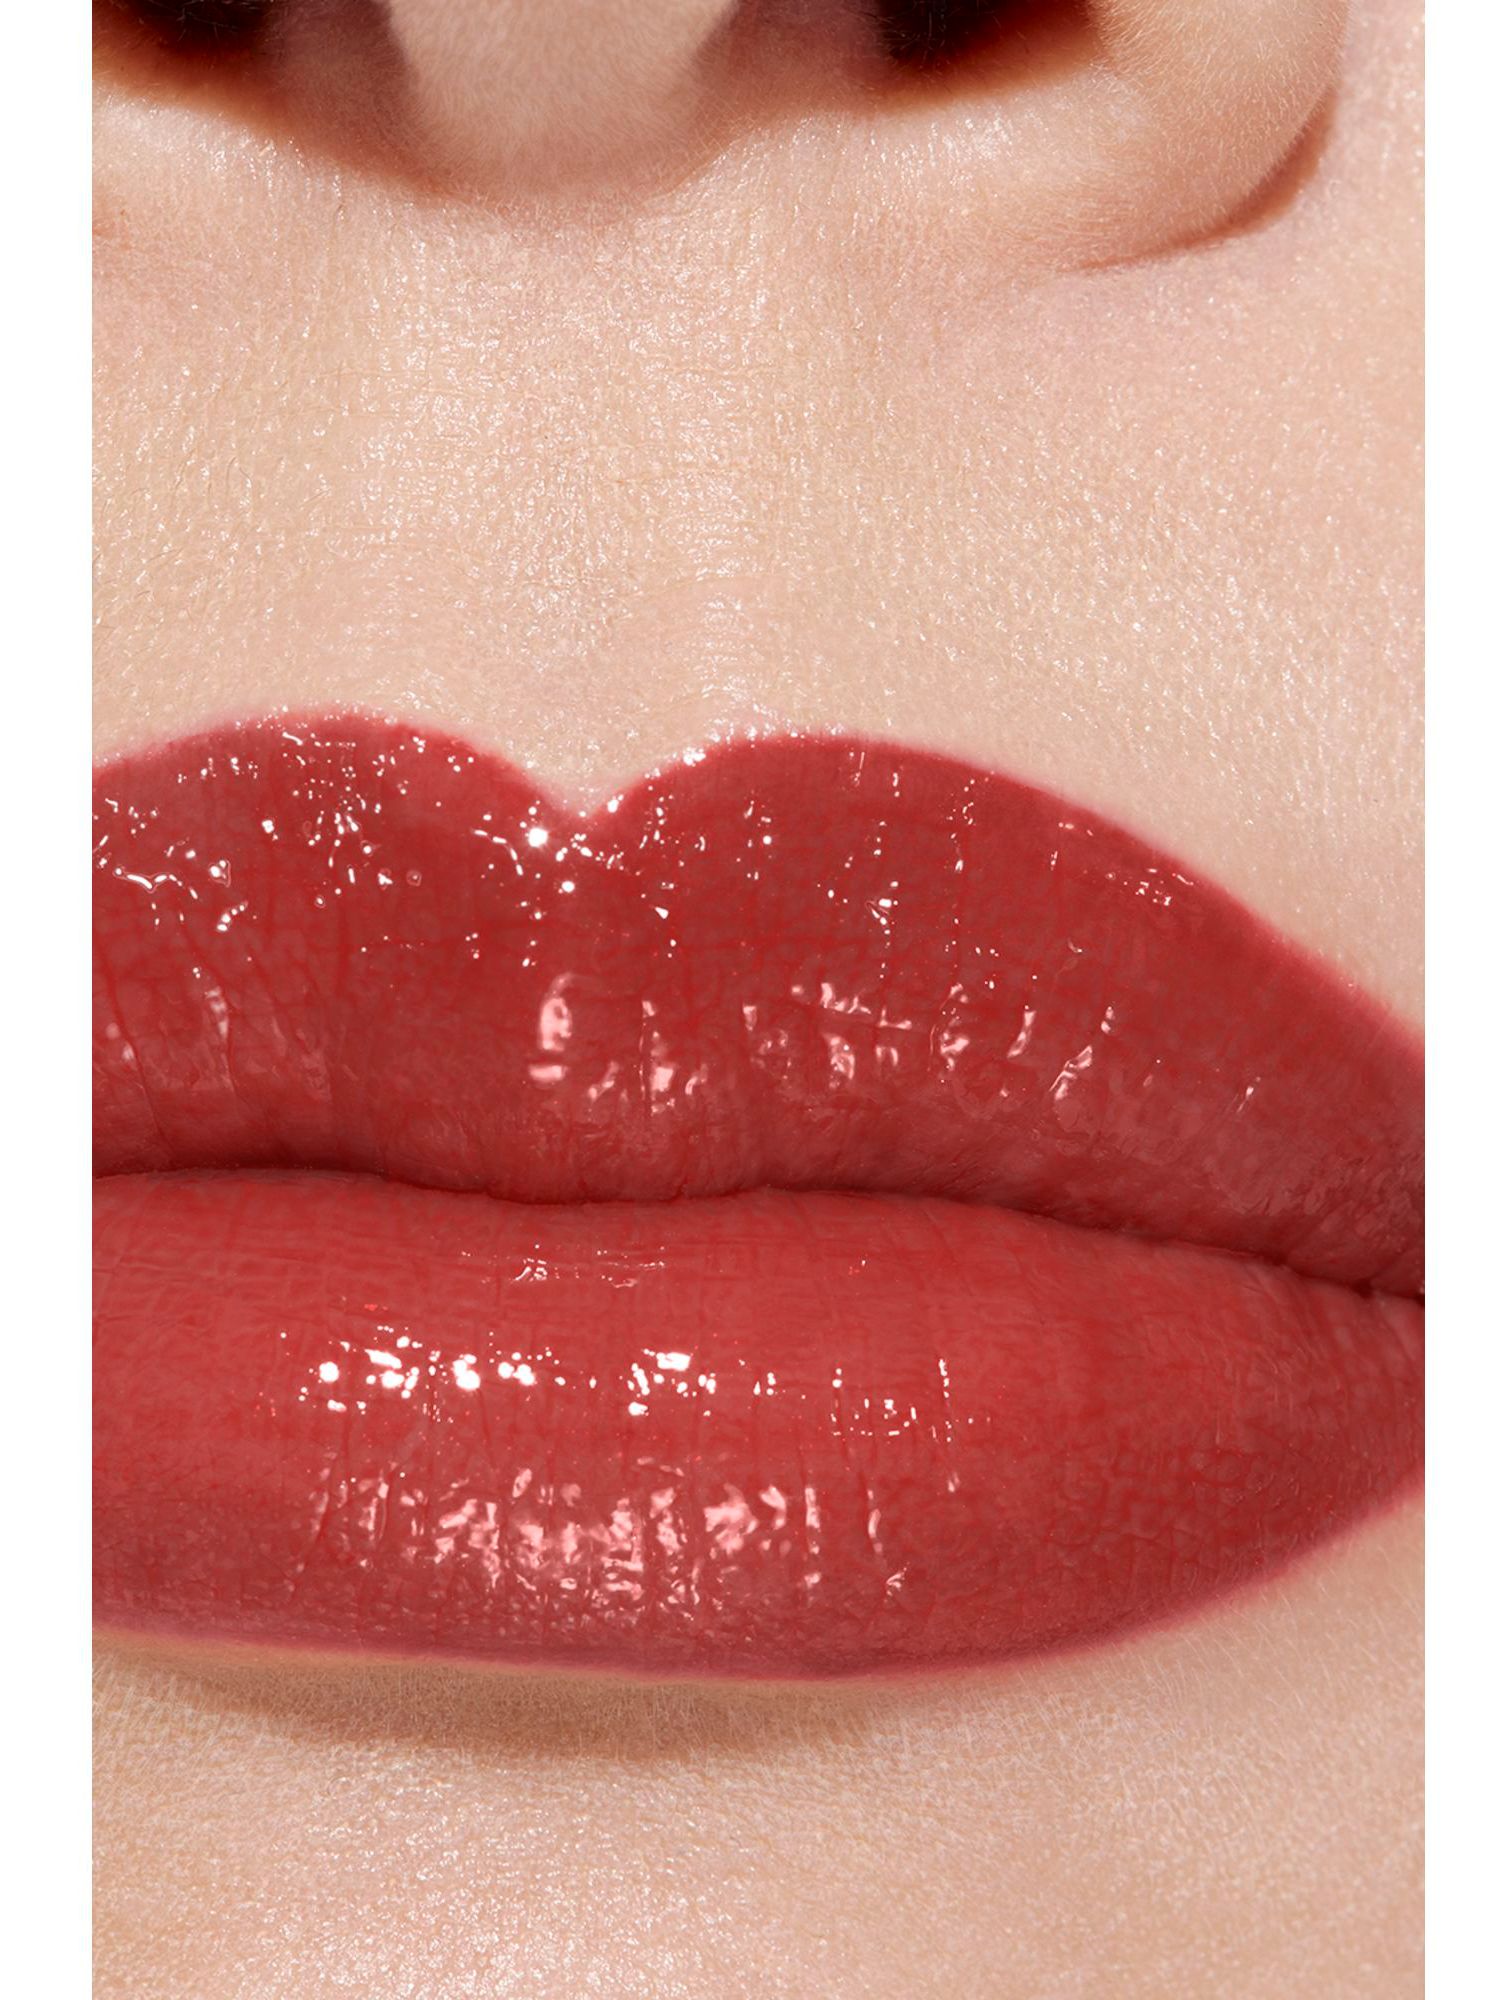 CHANEL Rouge Coco Flash Colour, Shine, Intensity In A Flash, 176 Escapade 4